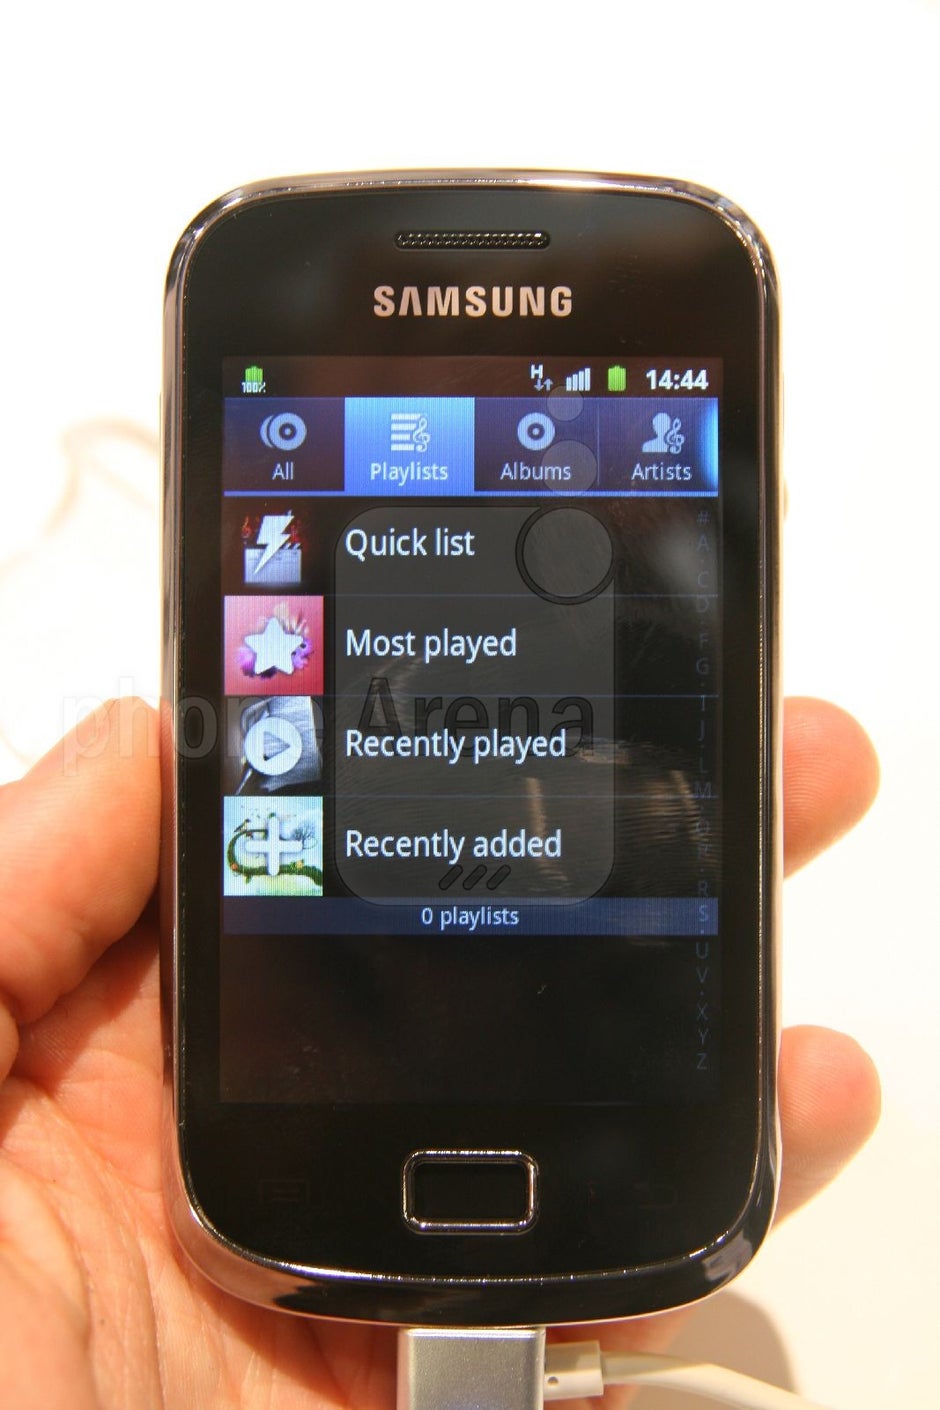 The Samsung Galaxy mini 2 will likely launch with Android 2.3 Gingerbread - Samsung Galaxy Mini 2 Hands-on Review